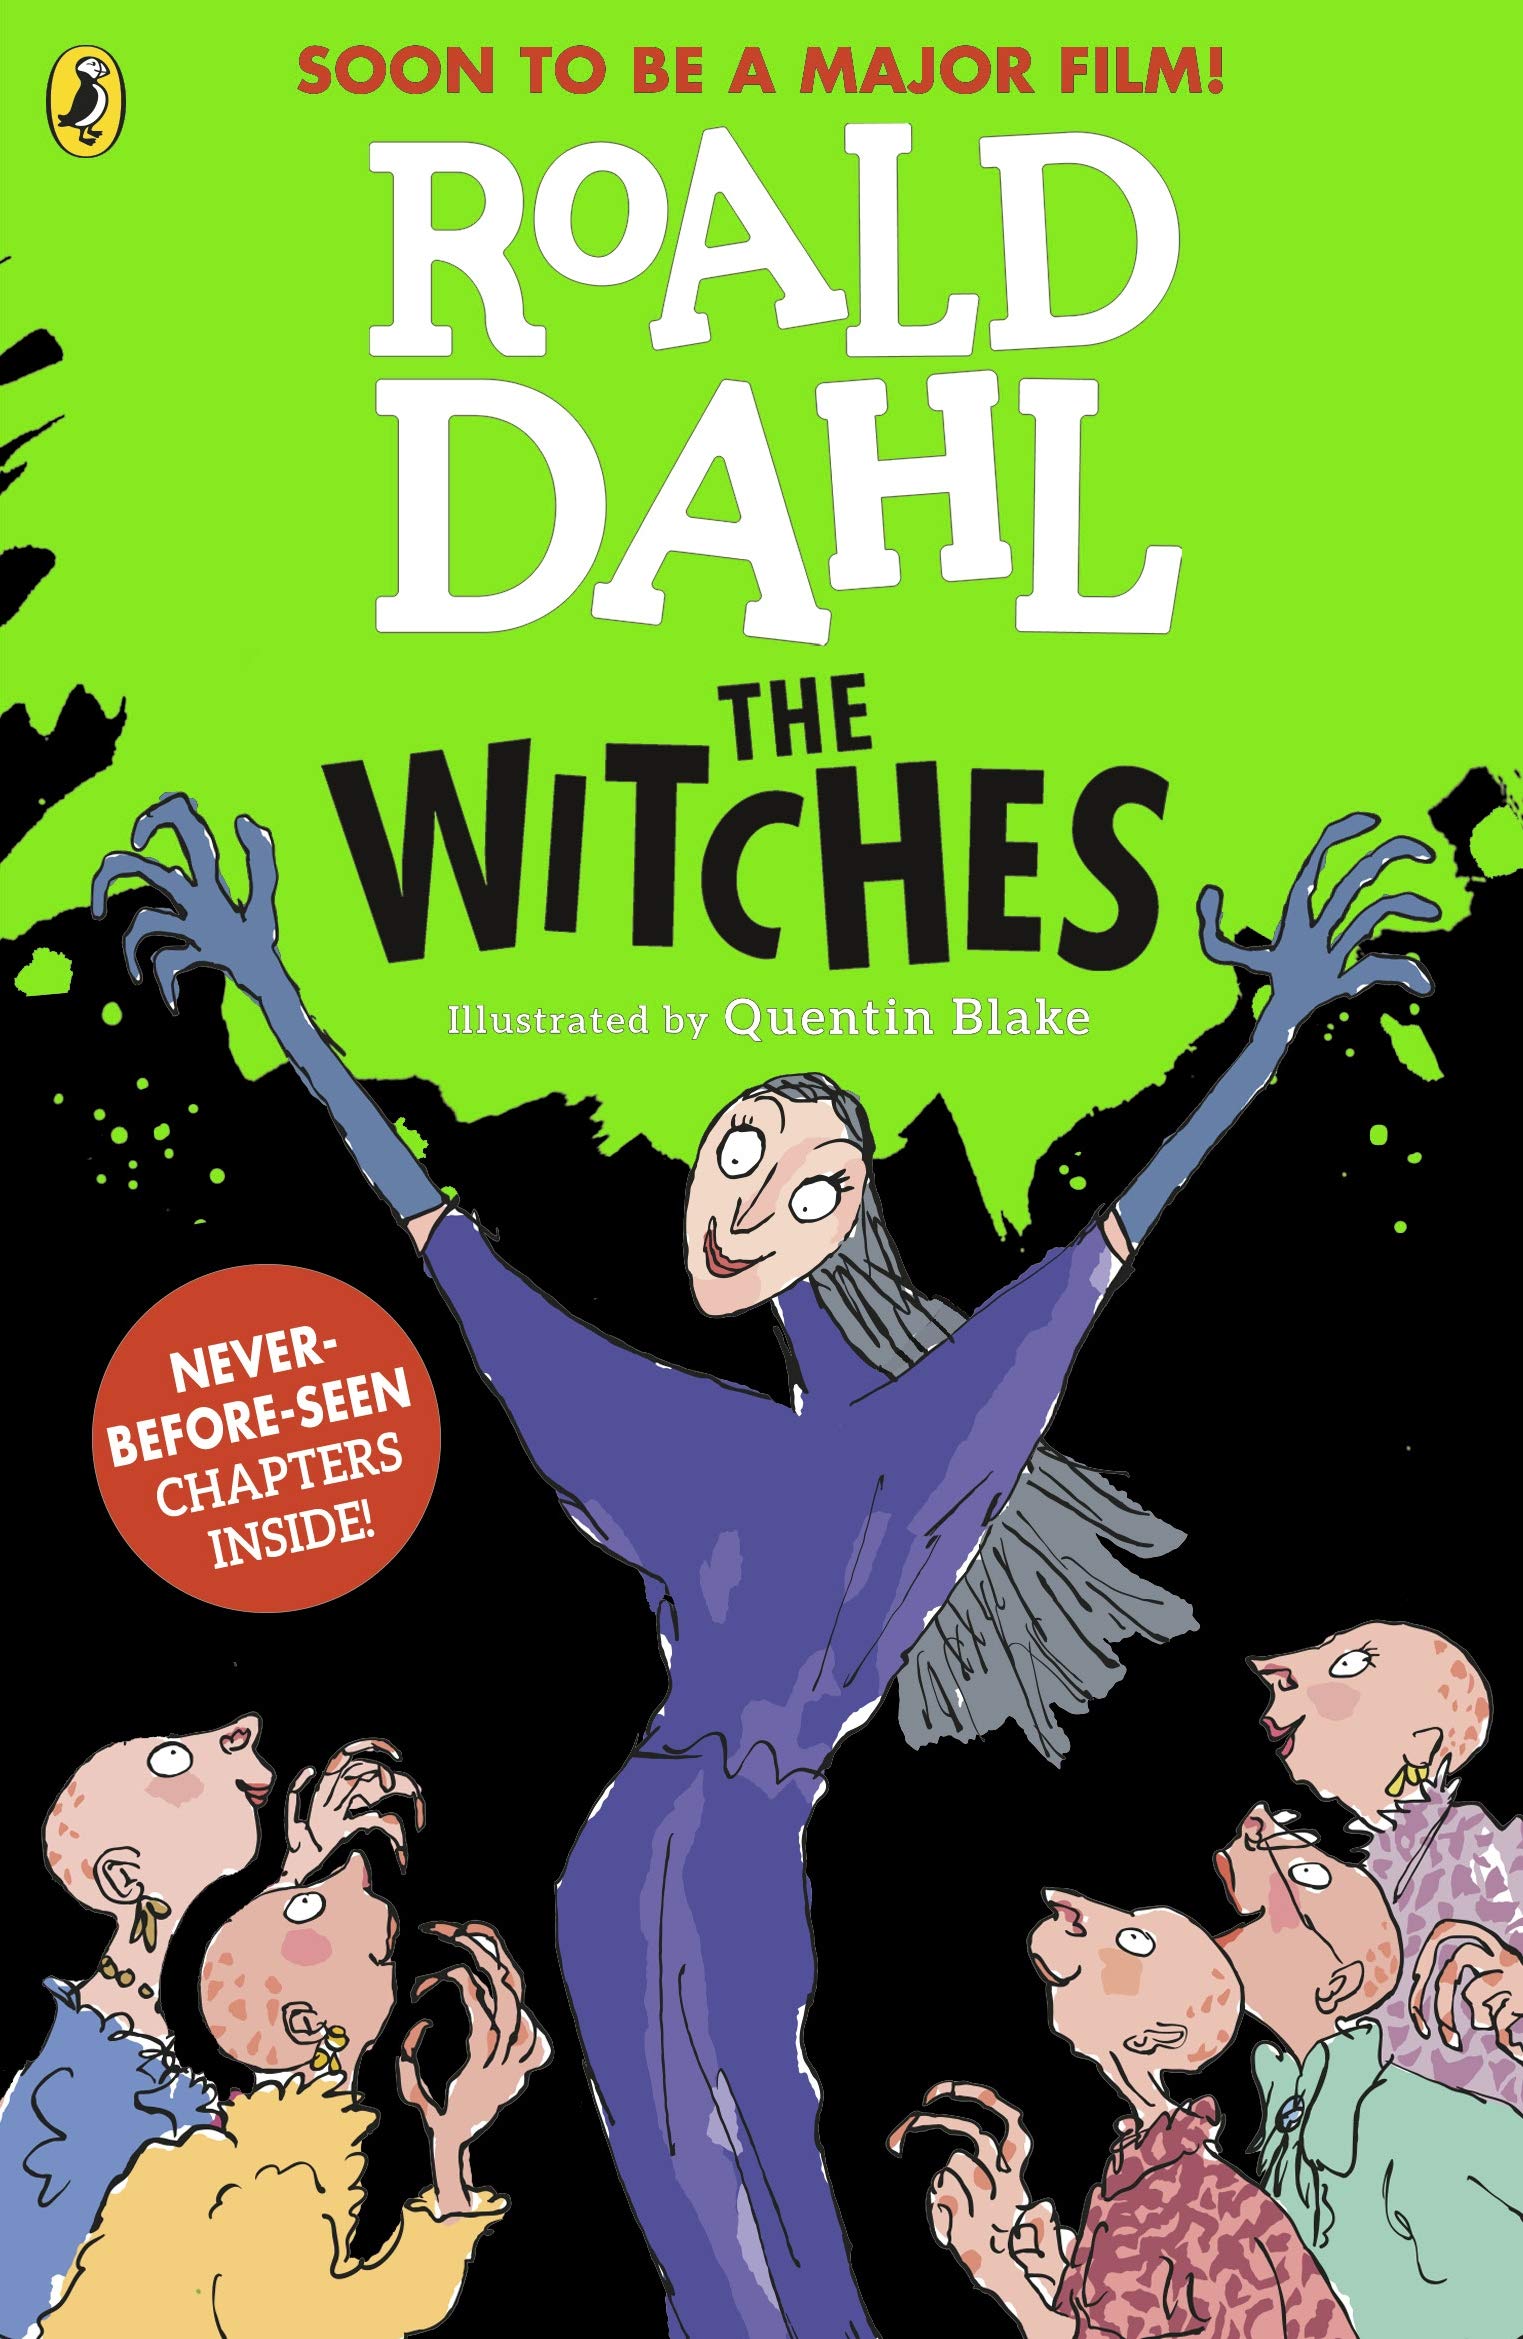 The Witches [paperback] Dahl, Roald